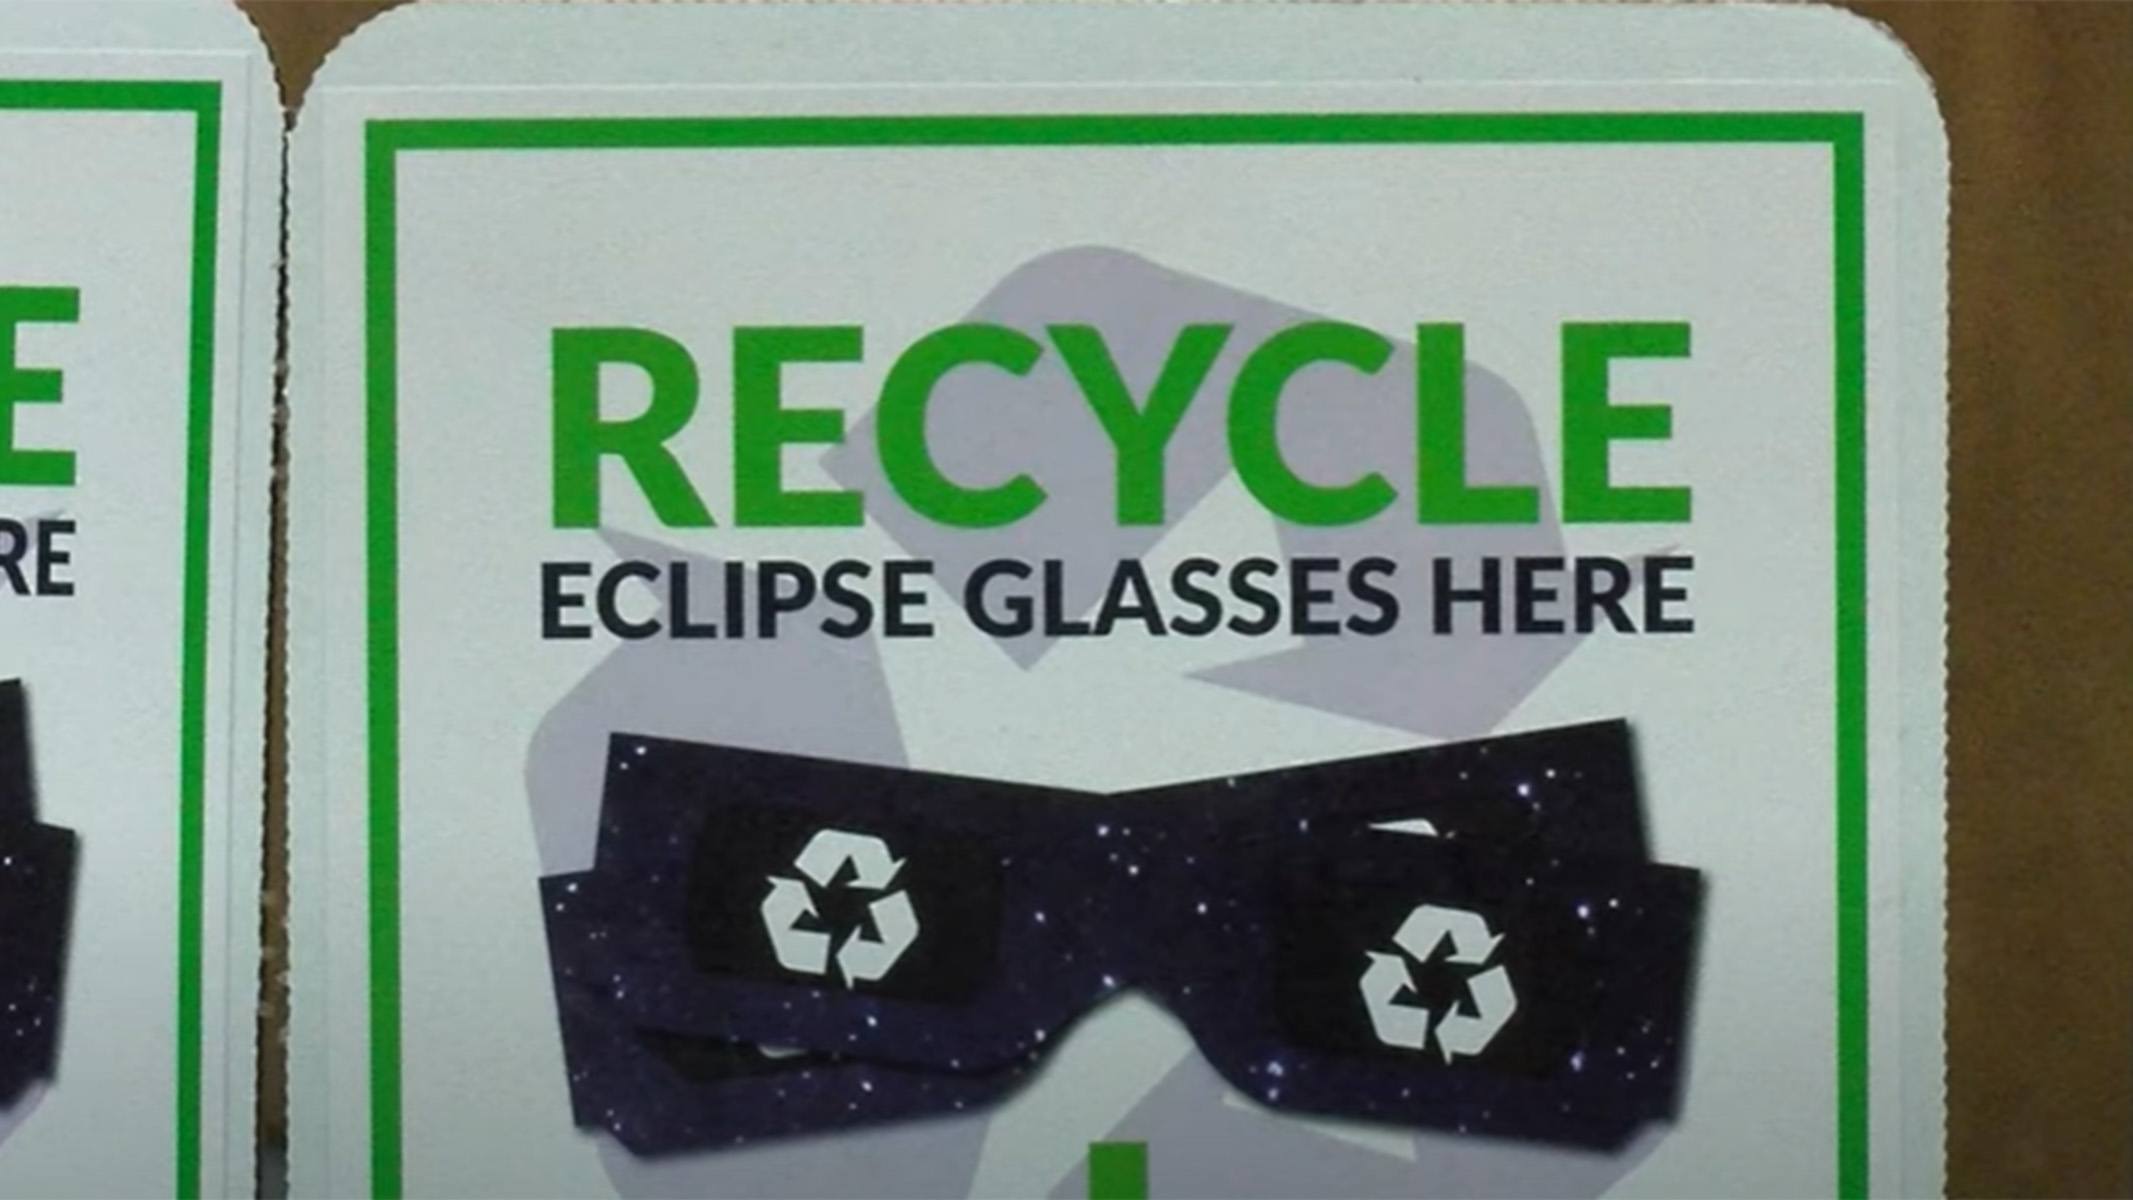 Recycling bin for eclipse glasses